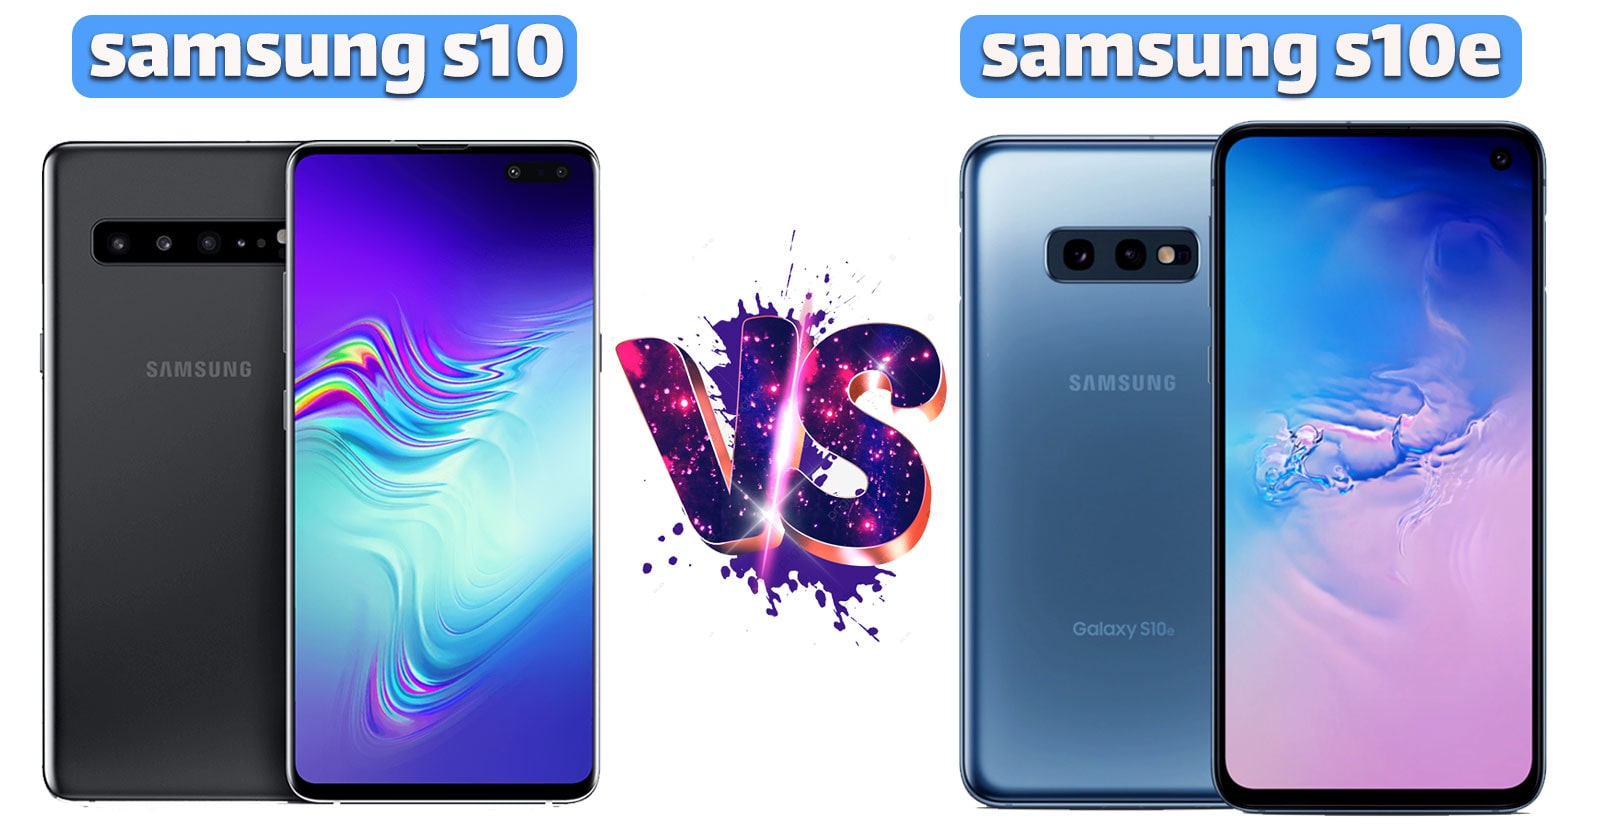 What Is the Difference Between Samsung S10 lite and S10e